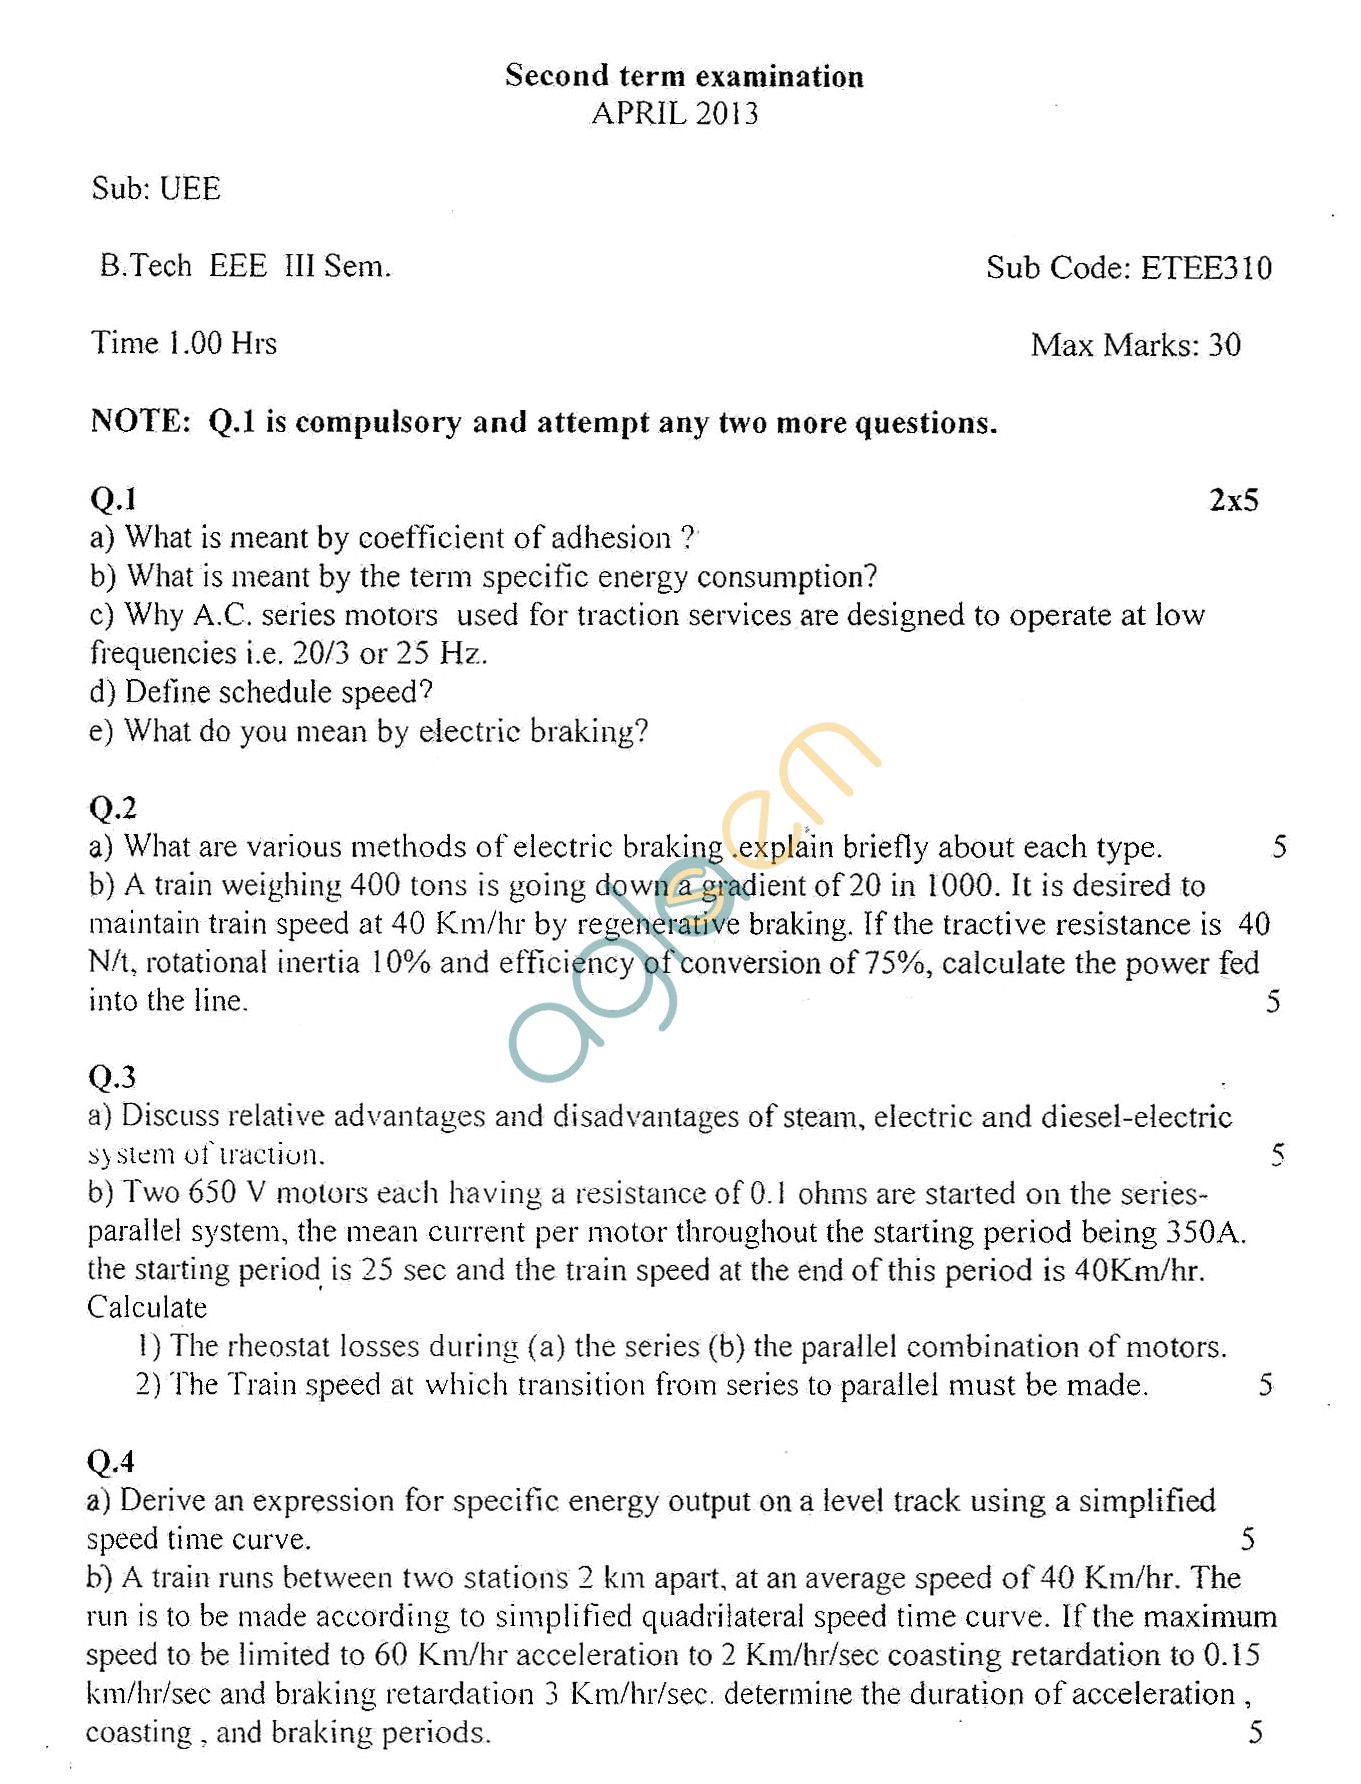 GGSIPU Question Papers Sixth Semester  Second Term 2013  ETEE-310